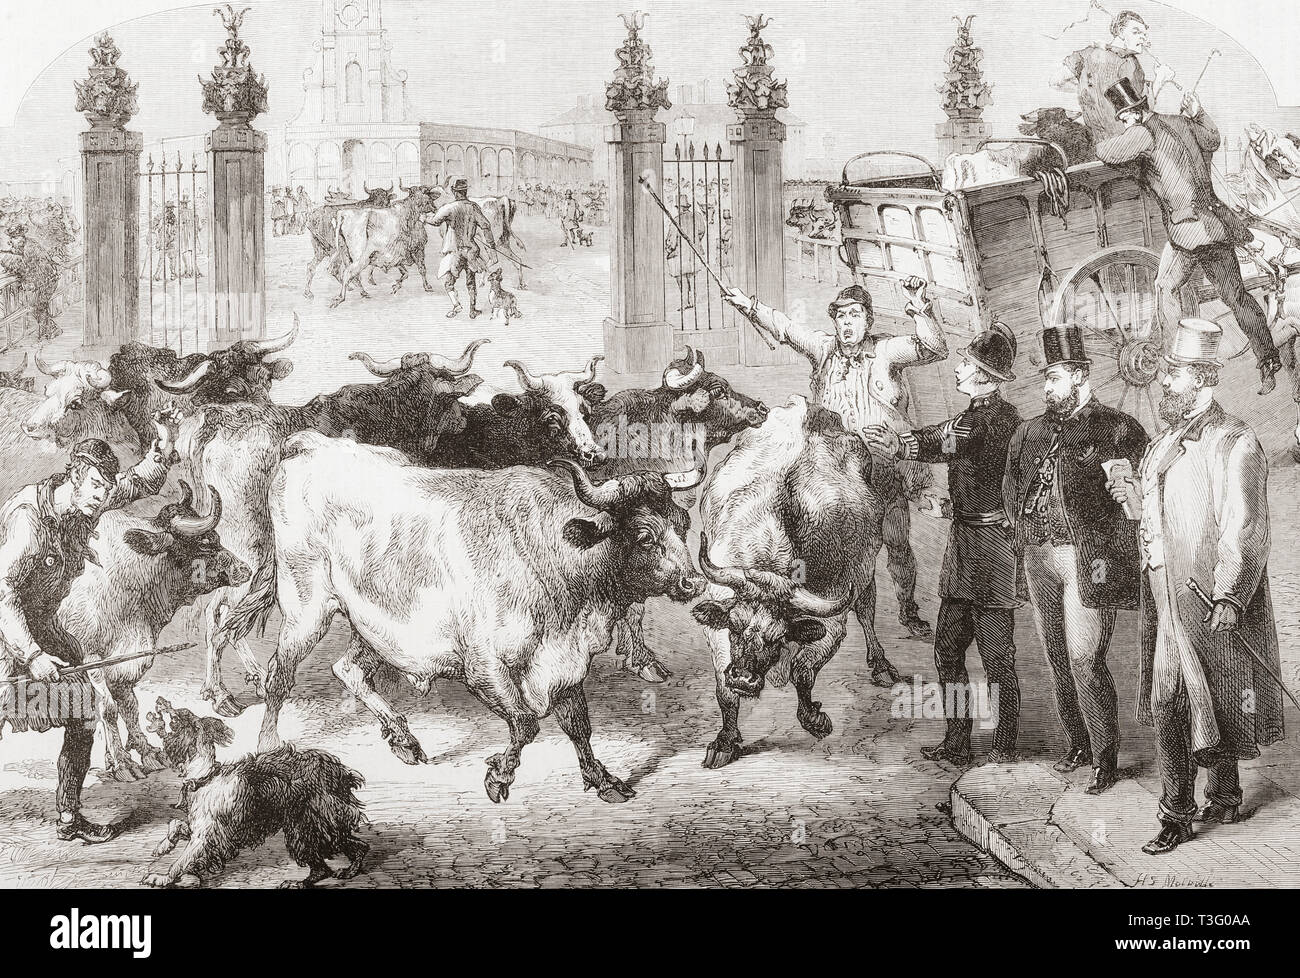 Inspection of foreign cattle at the Metropolitan Cattle Market, (later Caledonian Market) London, England, 1865.  From The Illustrated London News, published 1865. Stock Photo